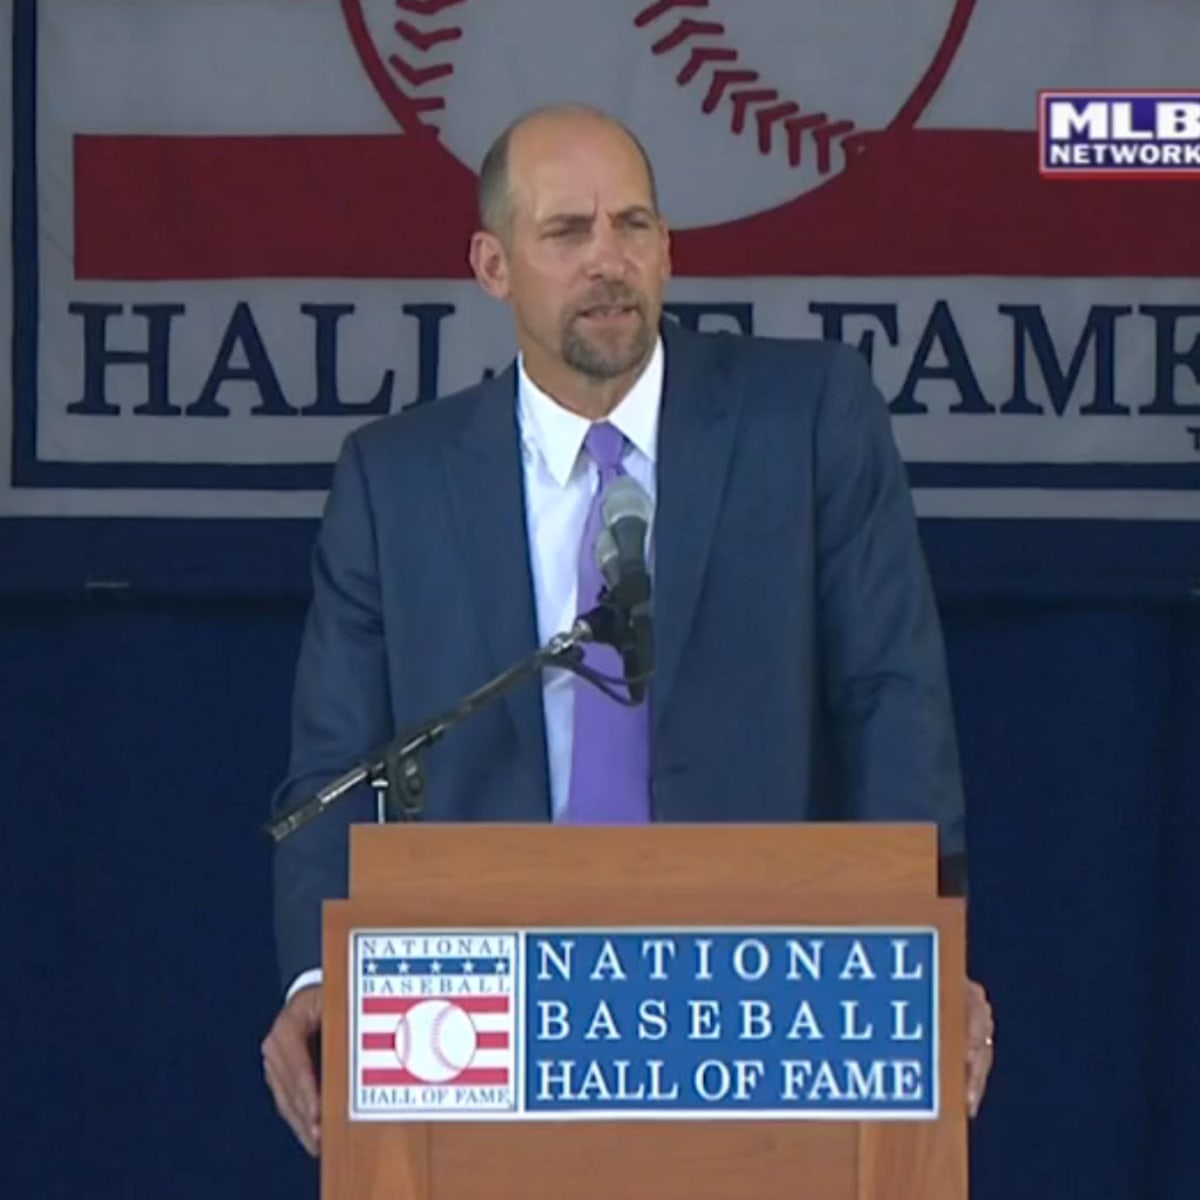 Former Braves pitcher John Smoltz gives Hall of Fame induction speech -  Sports Illustrated